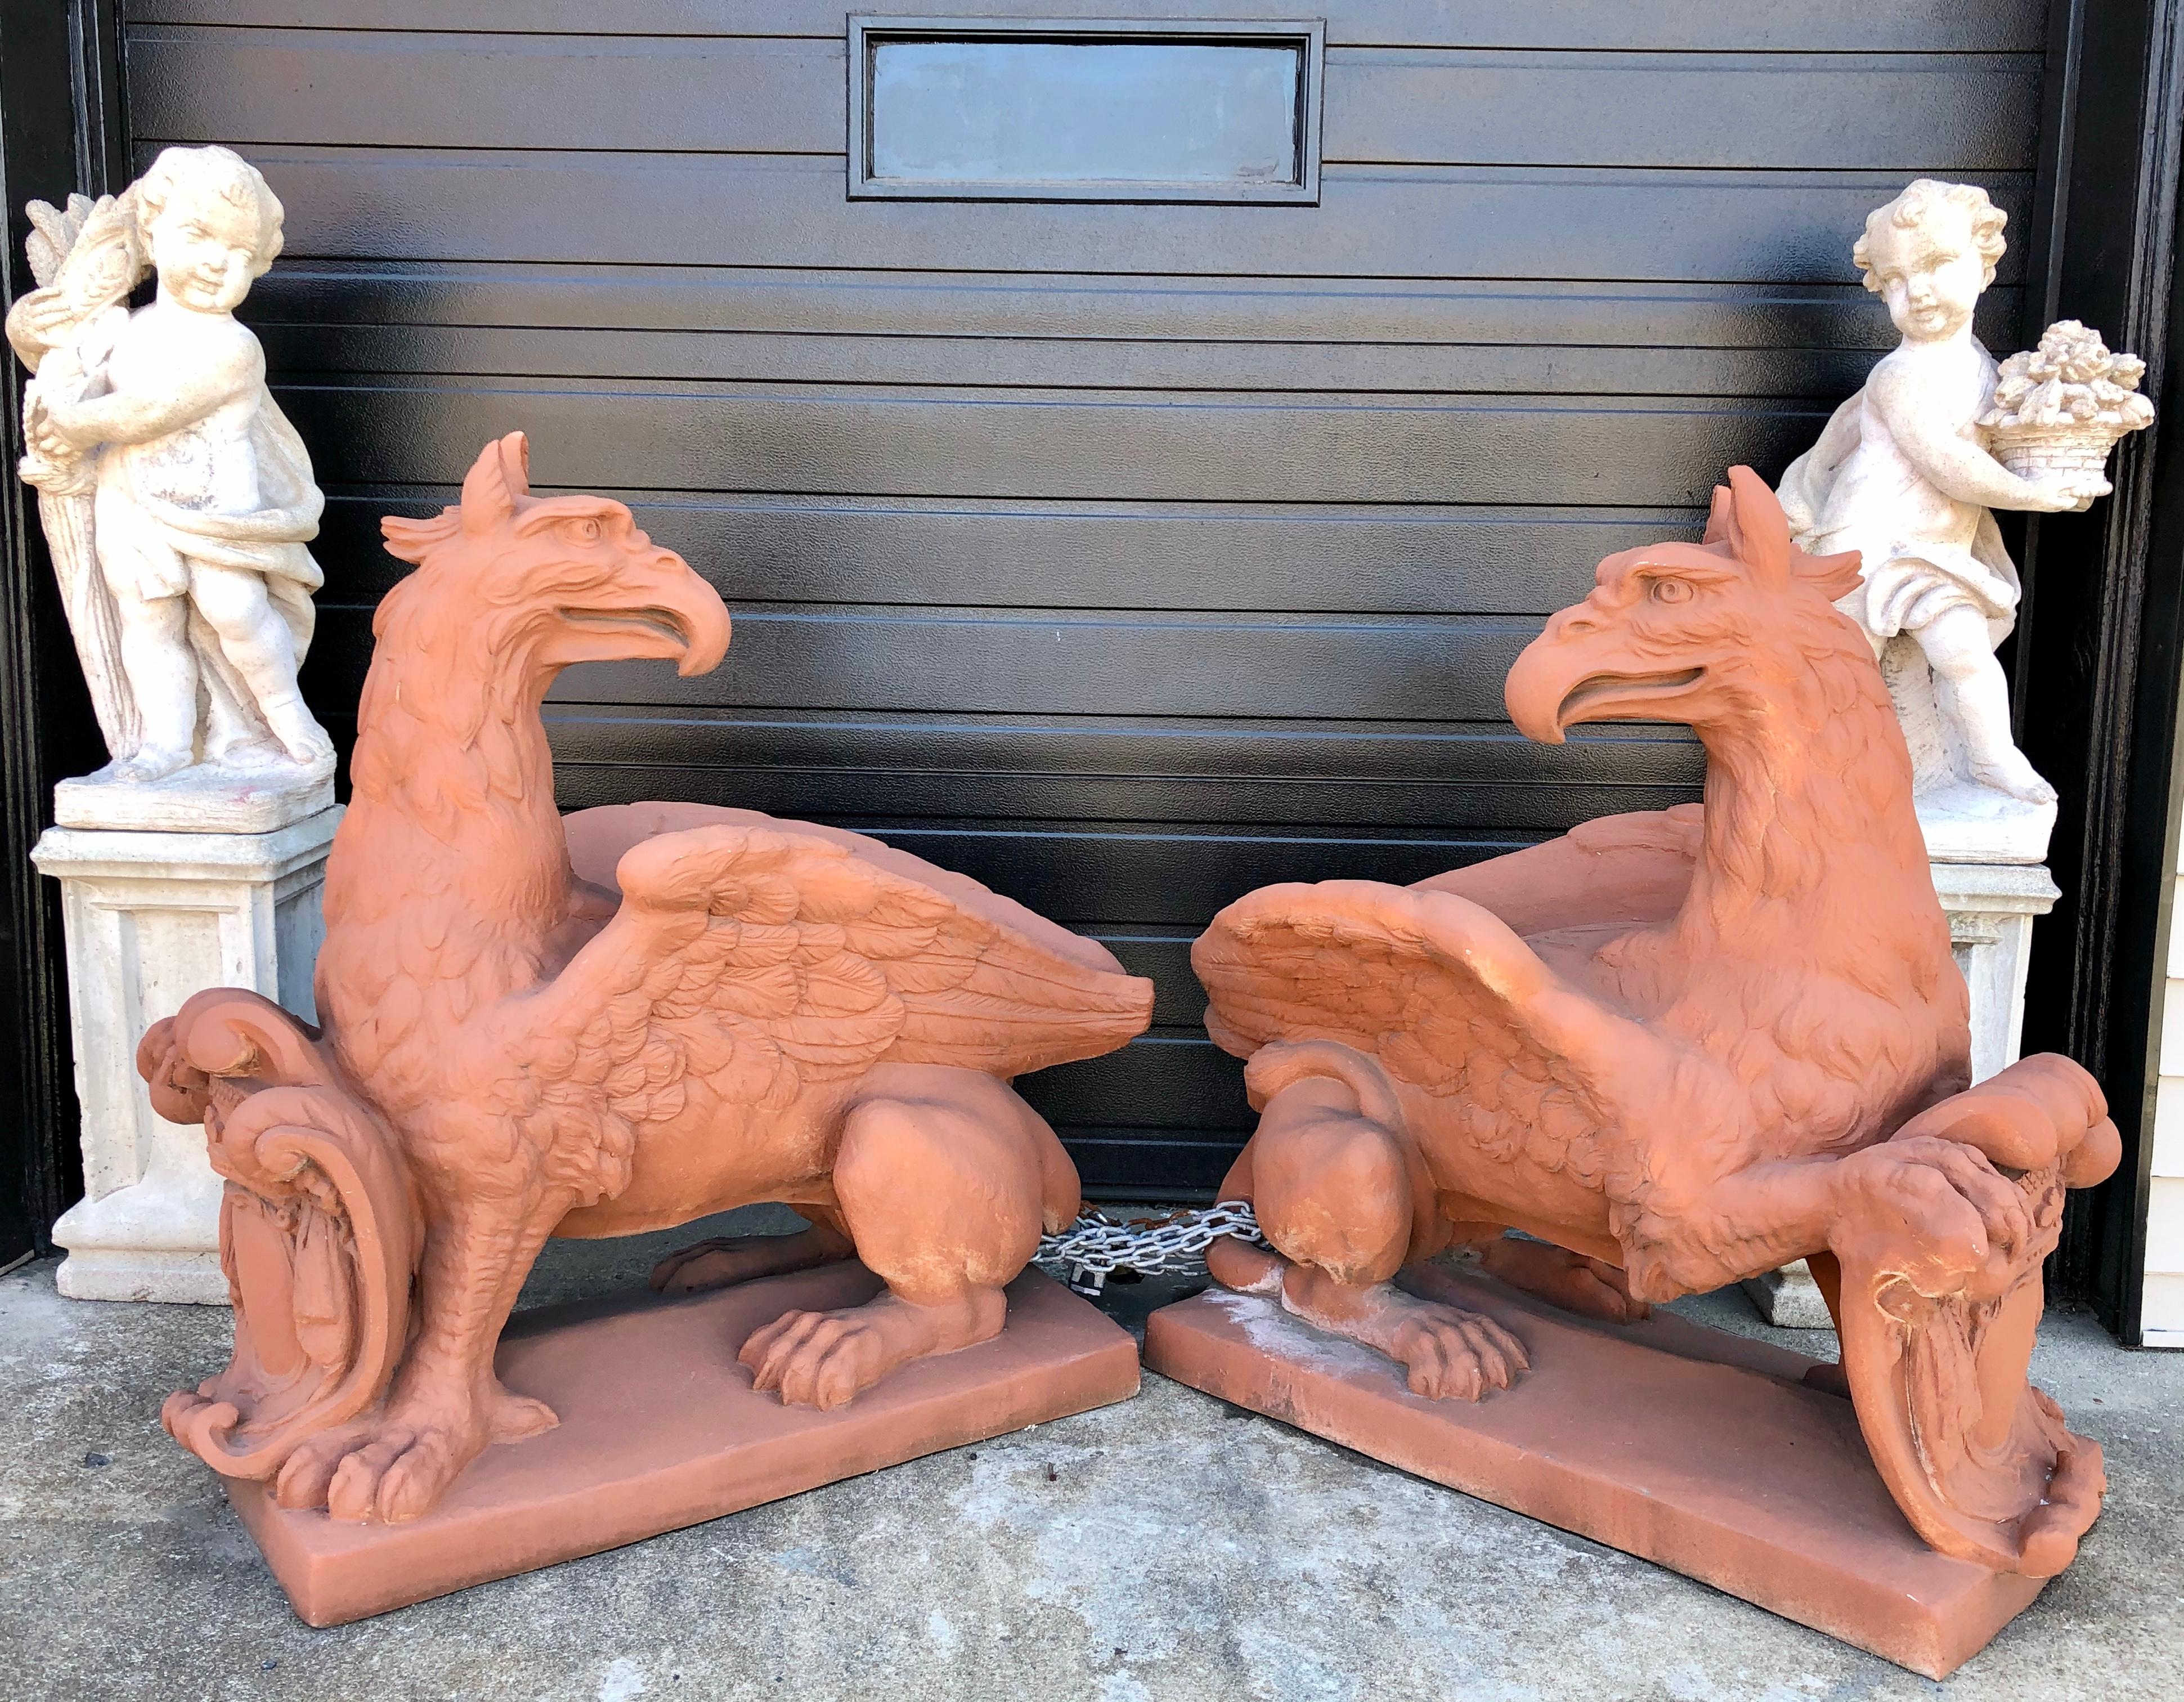 Pair of life sized terracotta gargoyles. Garden statues that appear so lifelike they actually scare you. These large and impressive sculptures can be placed inside or outside and can be painted to any color one likes.